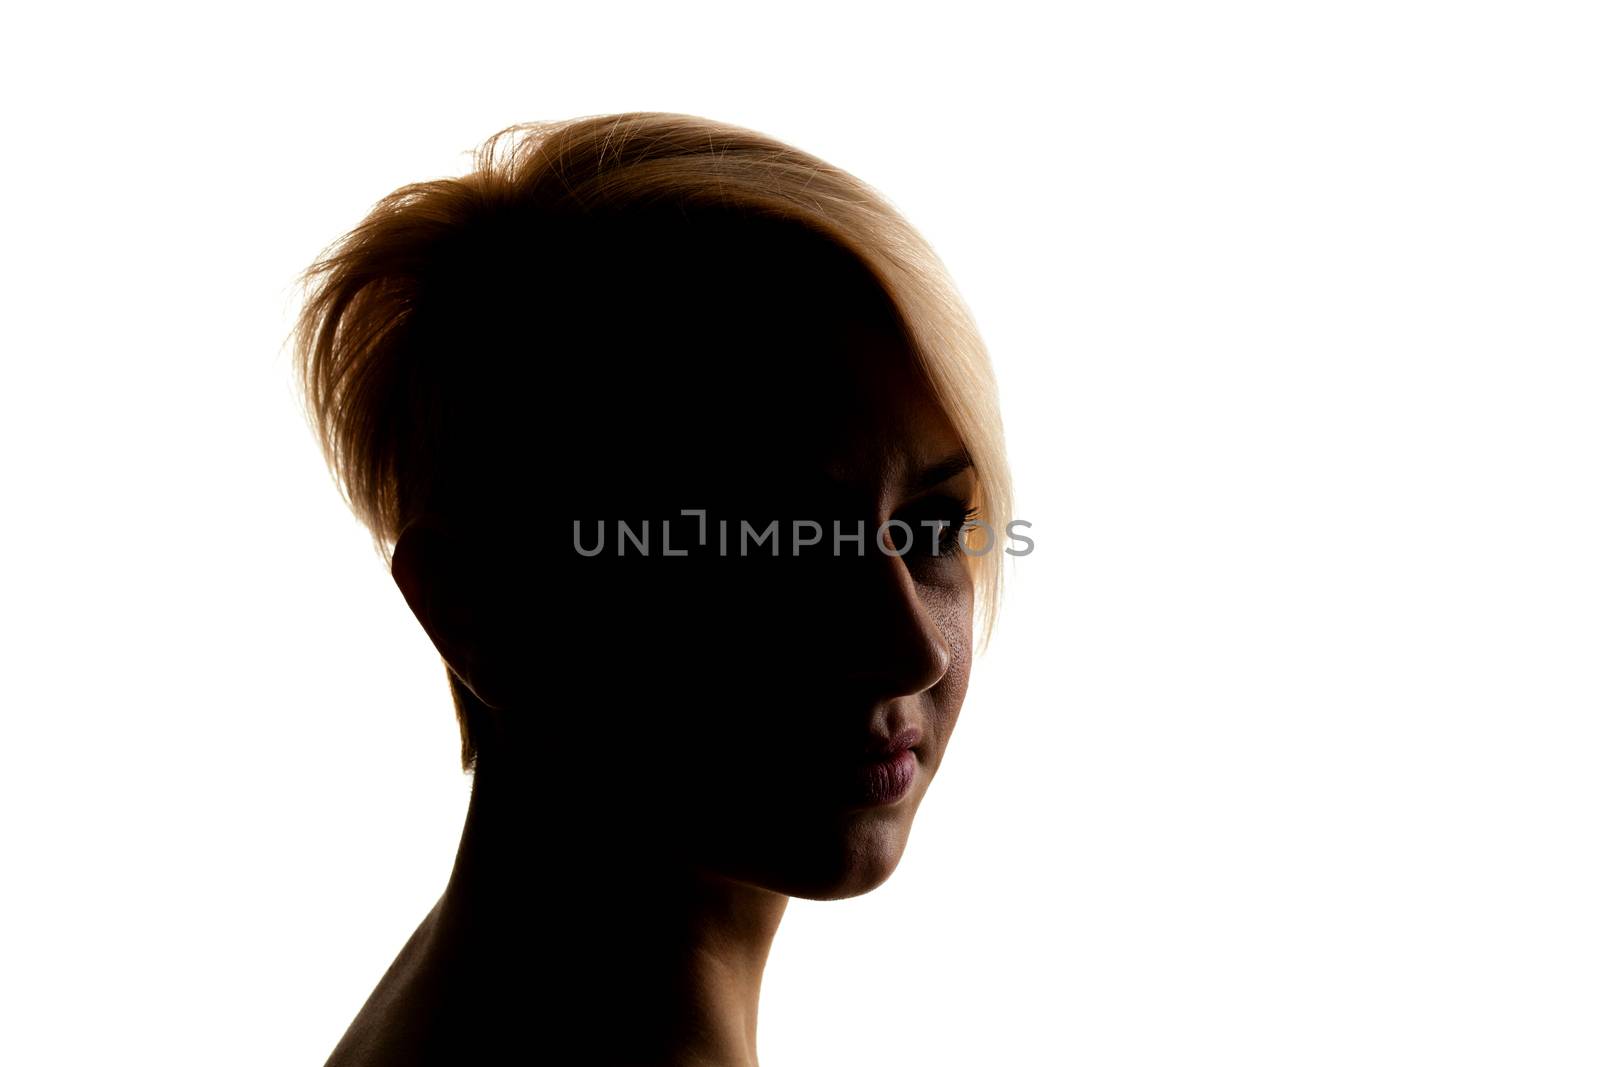 silhouette portrait of a beautiful caucasian girl with short hair